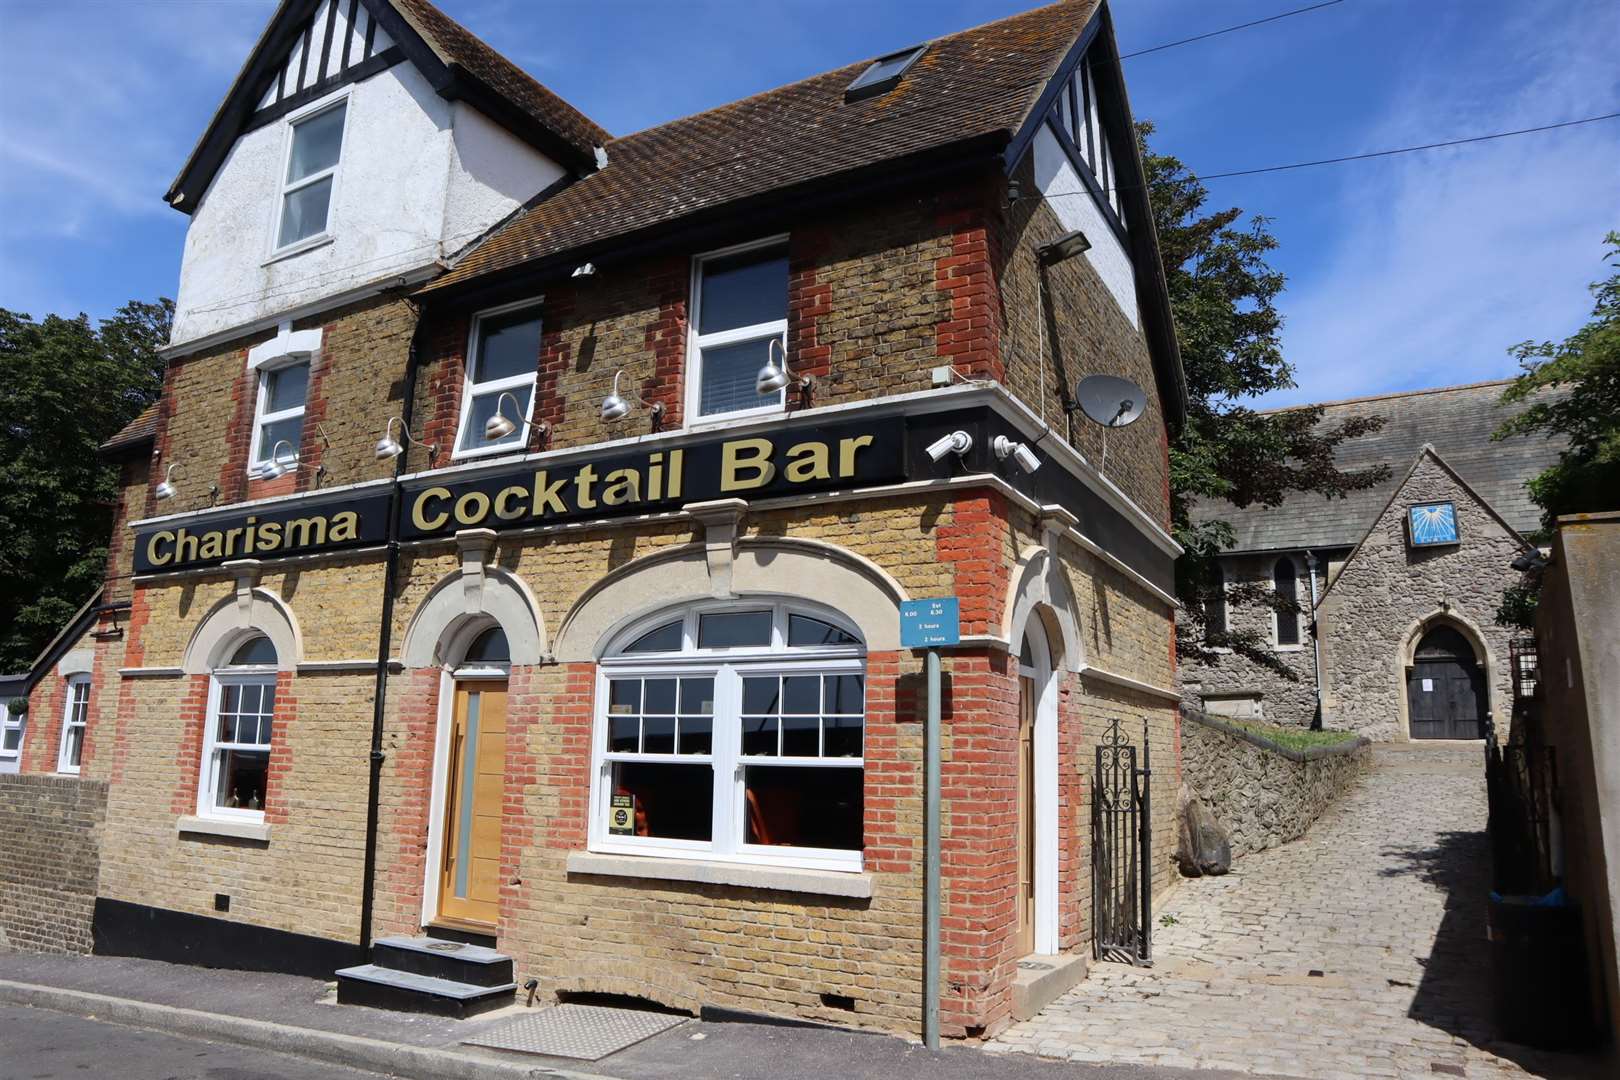 The King's Arms pub in Minster village is now Charisma Cocktails